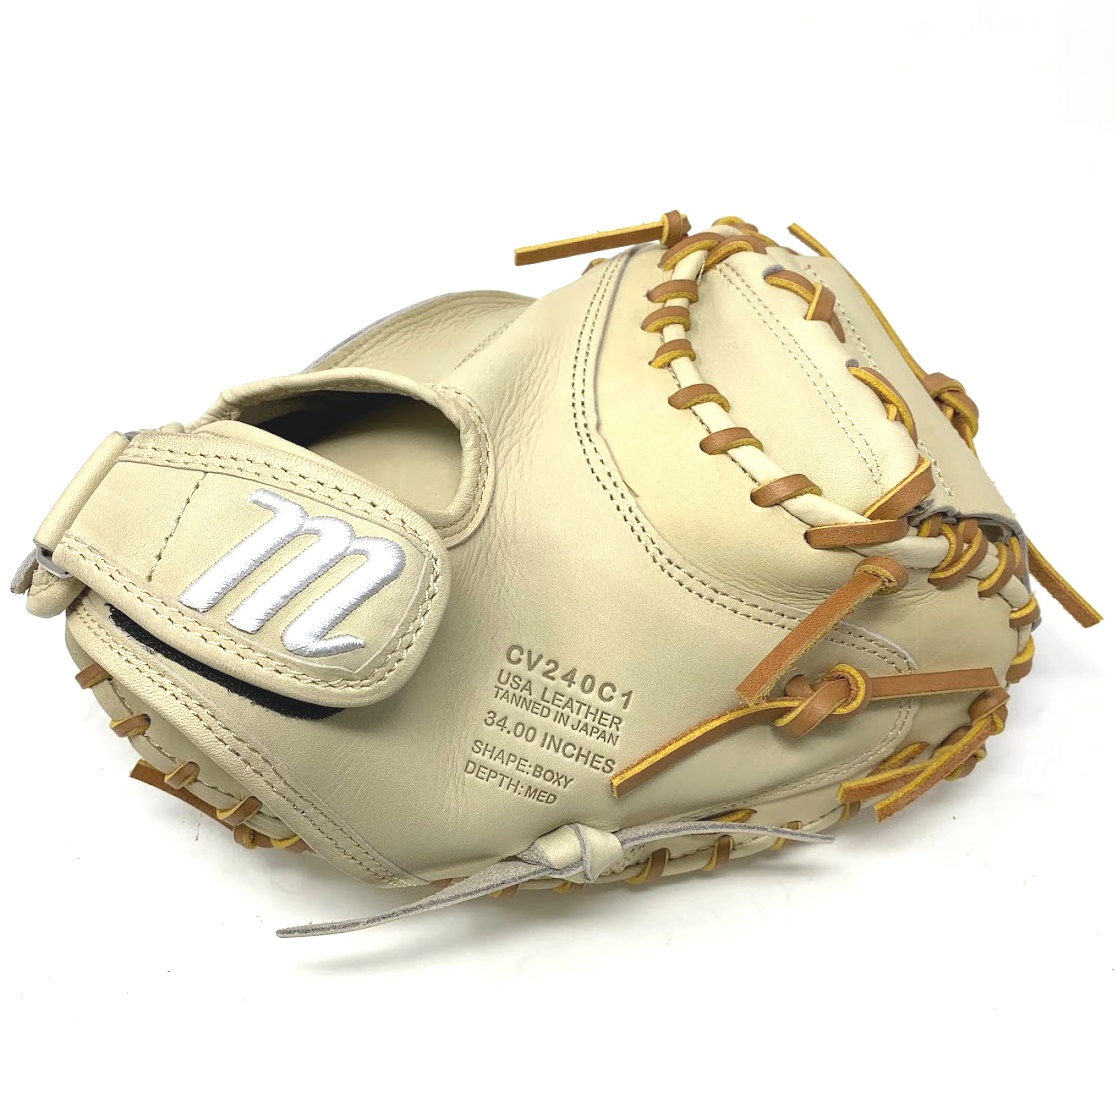 marucci-cypress-m-type-catchers-mitt-34-inch-right-hand-throw MFGCYMV240C1-CM-RightHandThrow Marucci  <h1 class=productView-title-lower>CYPRESS M TYPE V240C1 34 SOLID WEB CATCHERS MITT</h1> <p><span><em>The